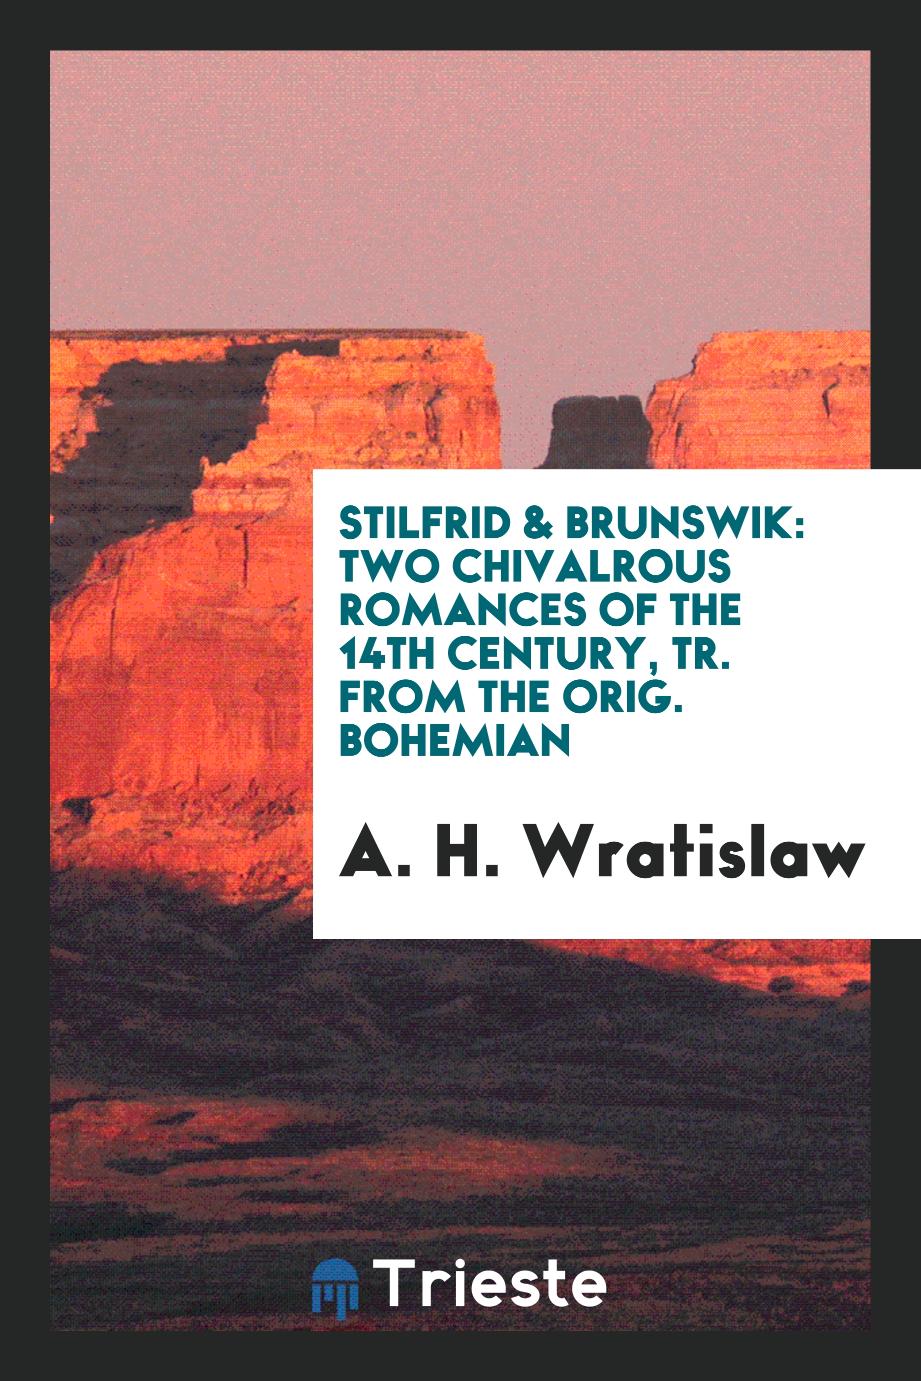 Stilfrid & Brunswik: two chivalrous romances of the 14th century, tr. from the orig. Bohemian